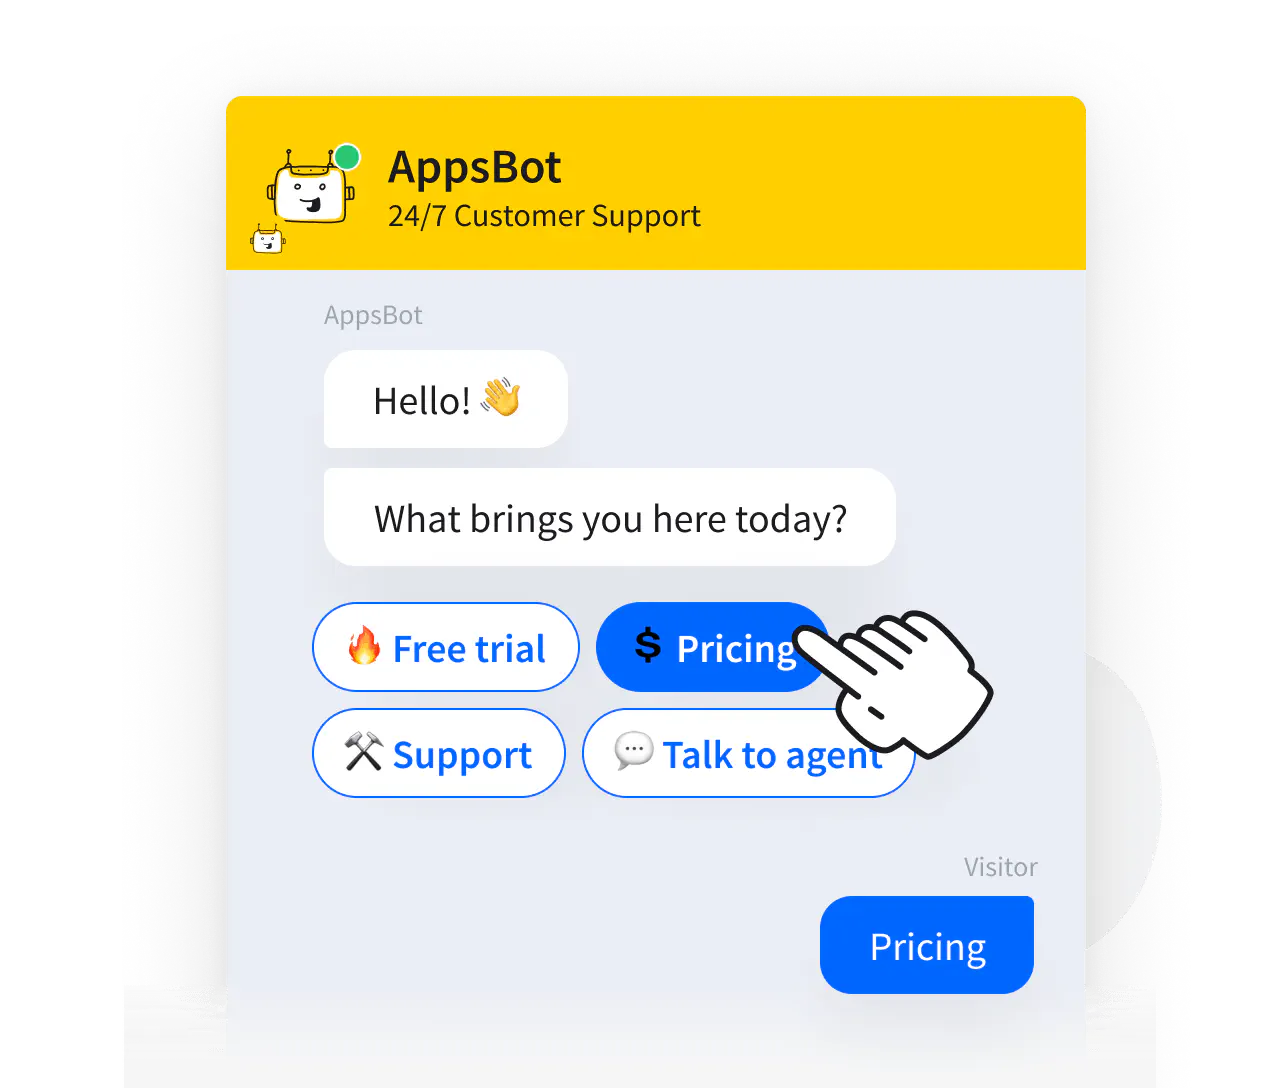 ChatBot view